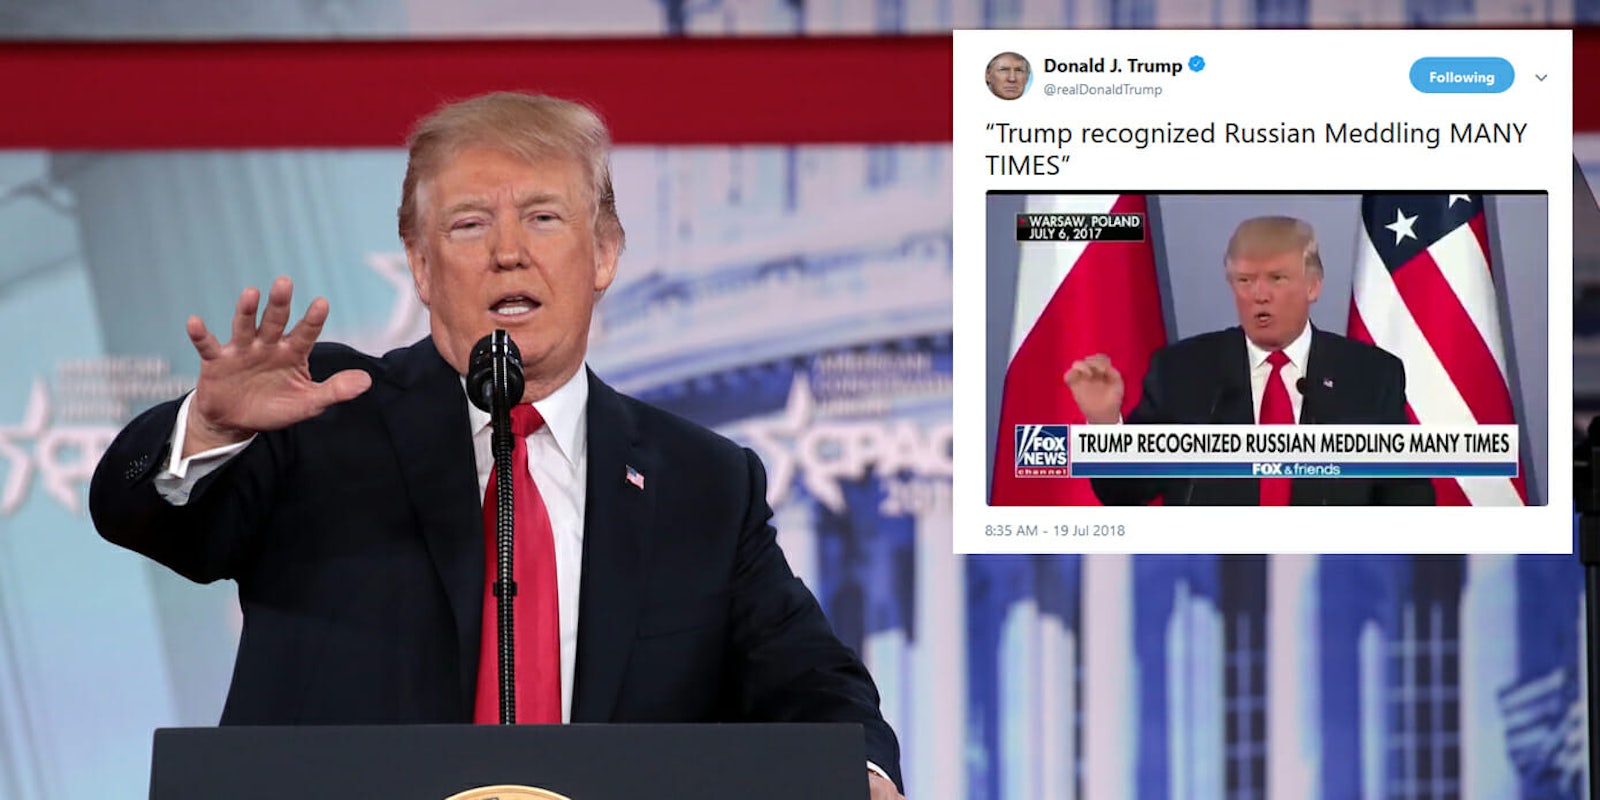 President Donald Trump continued to try and defend himself from criticism over his remarks about Russian election meddling with a Twitter clip.